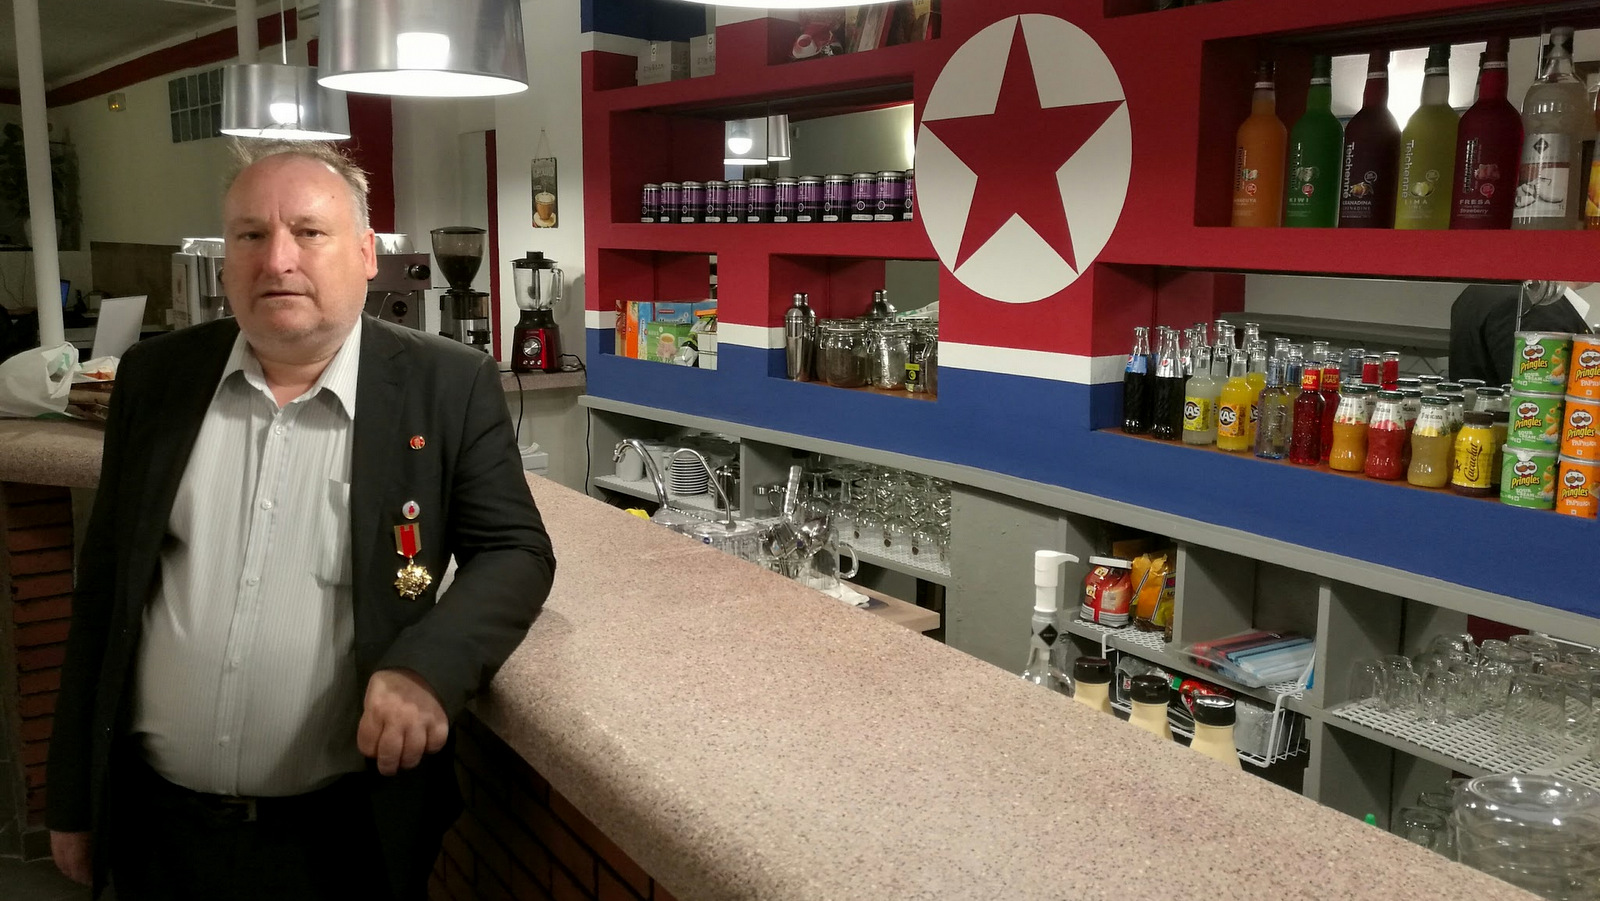 Dermot Hudson, Official Delegate of the KFA to UK at the Pyongyang Cafe in Tarragona, Spain. (Photo: Anglo-Peoples Korea/Songun)